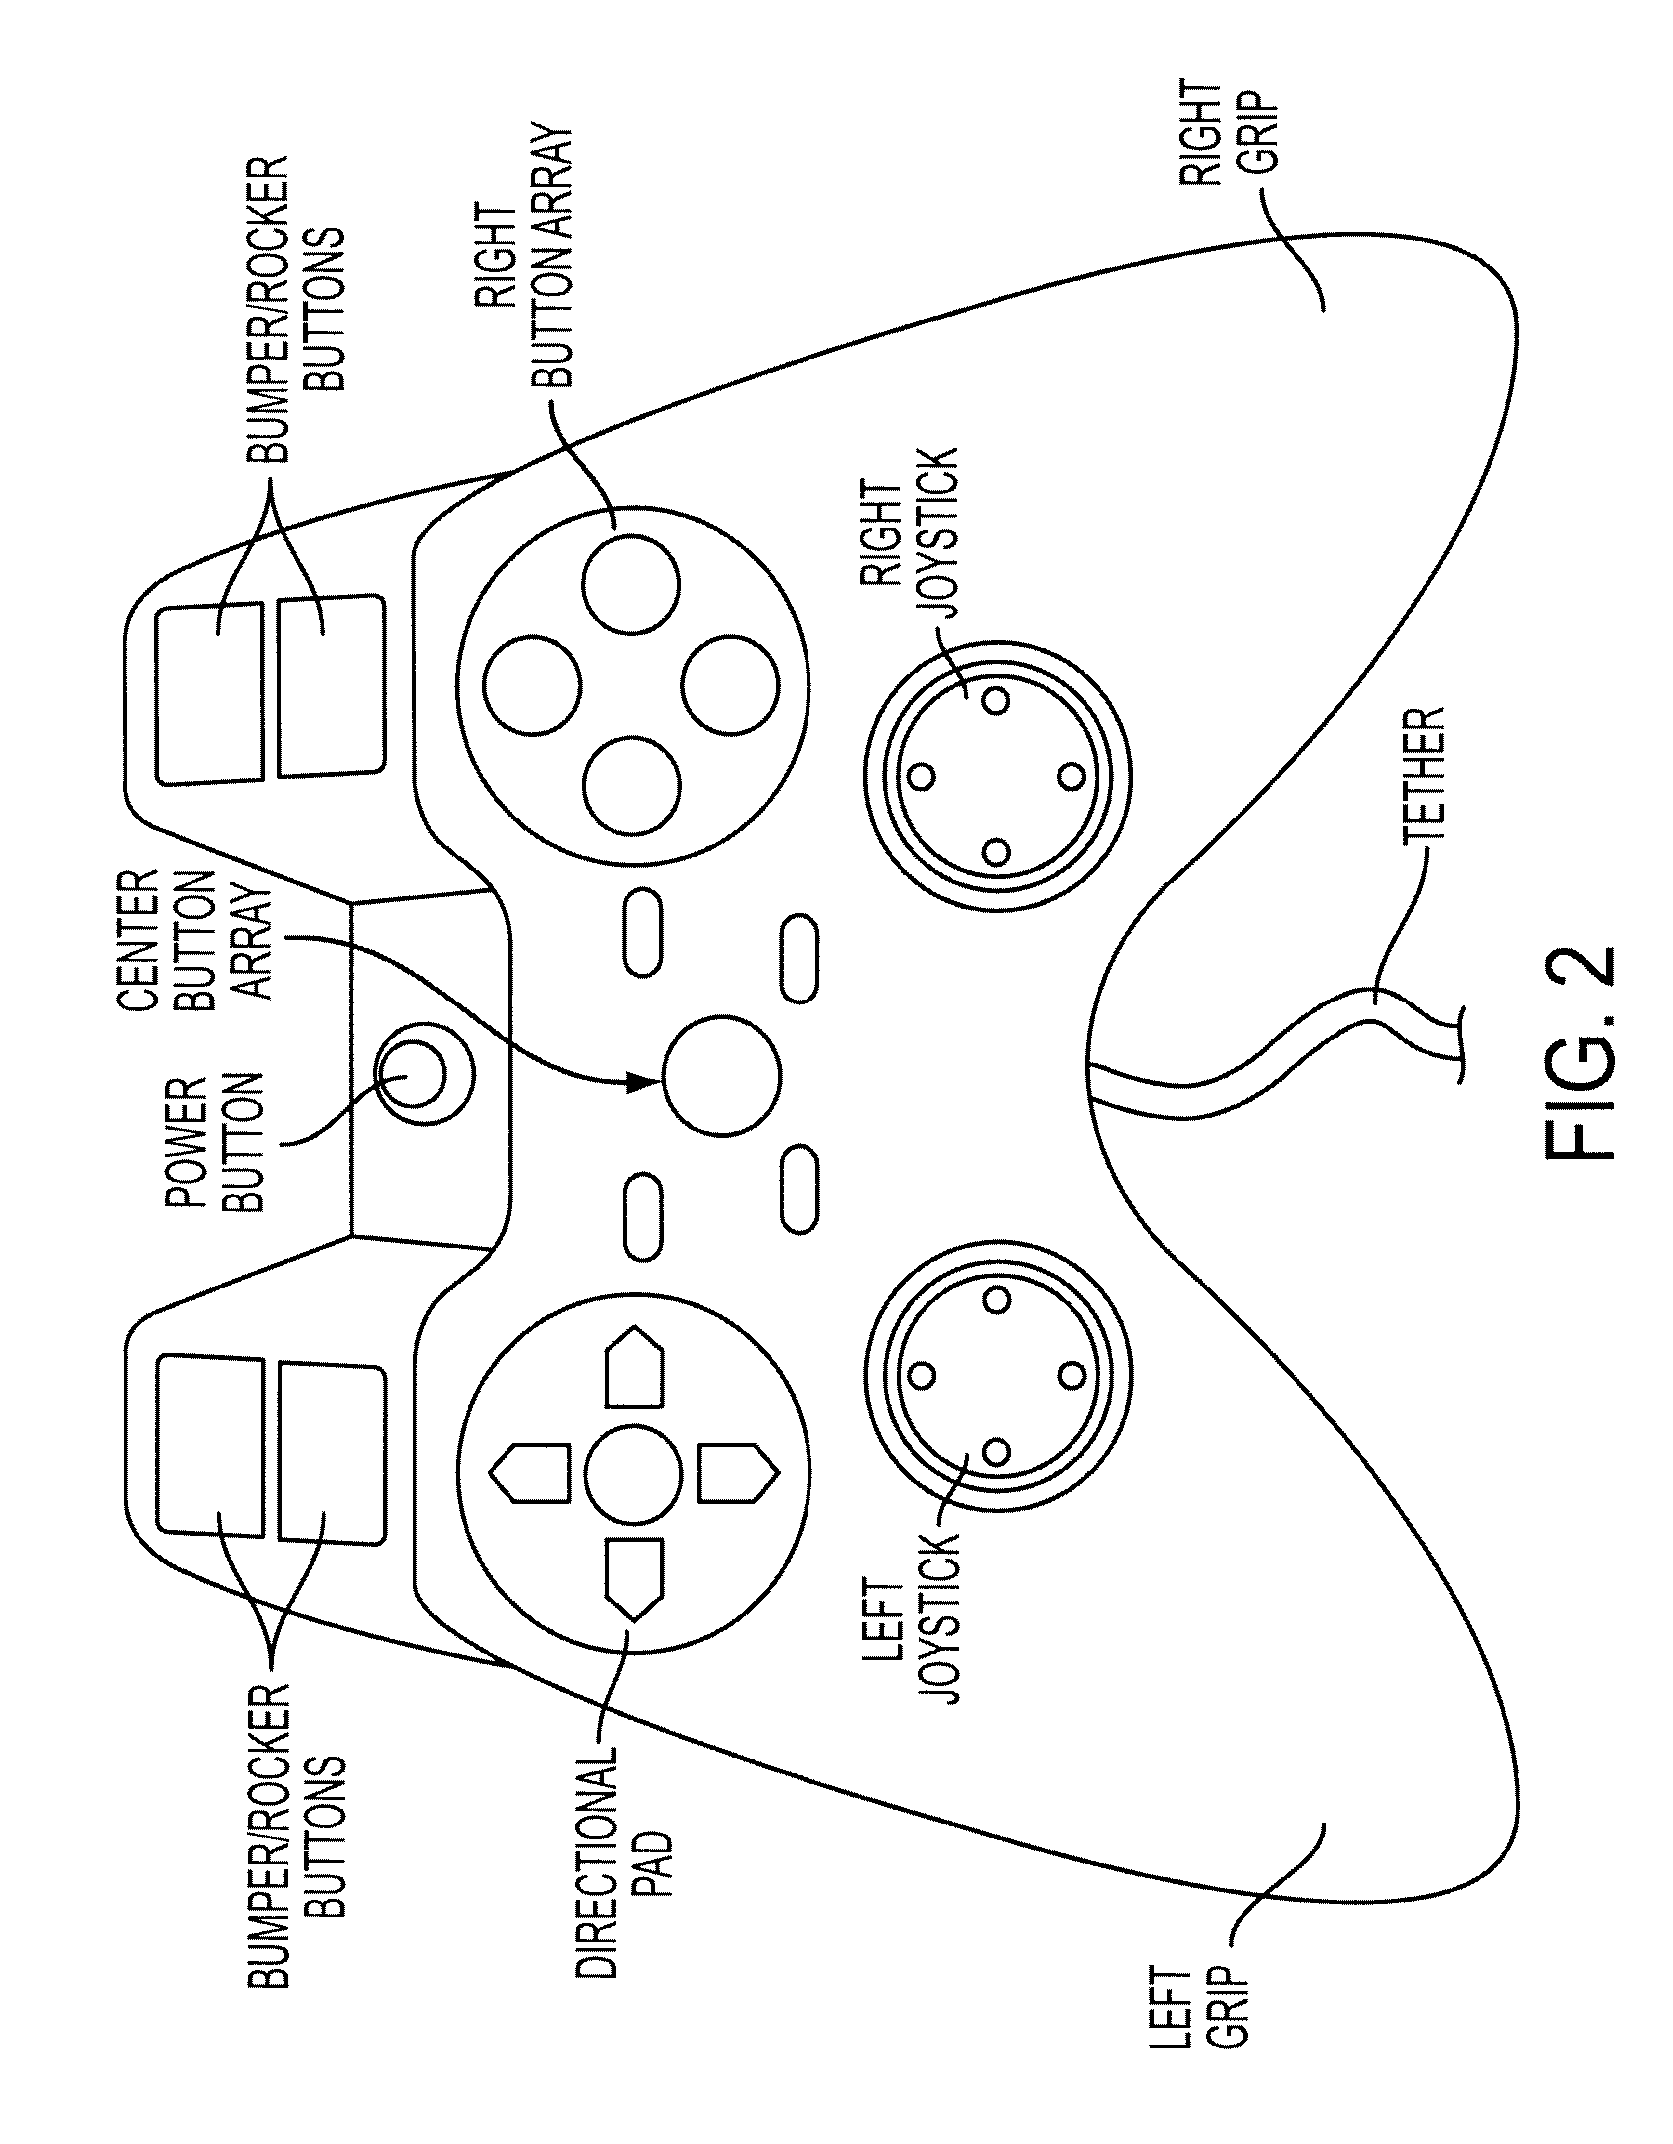 Control system for a remote vehicle